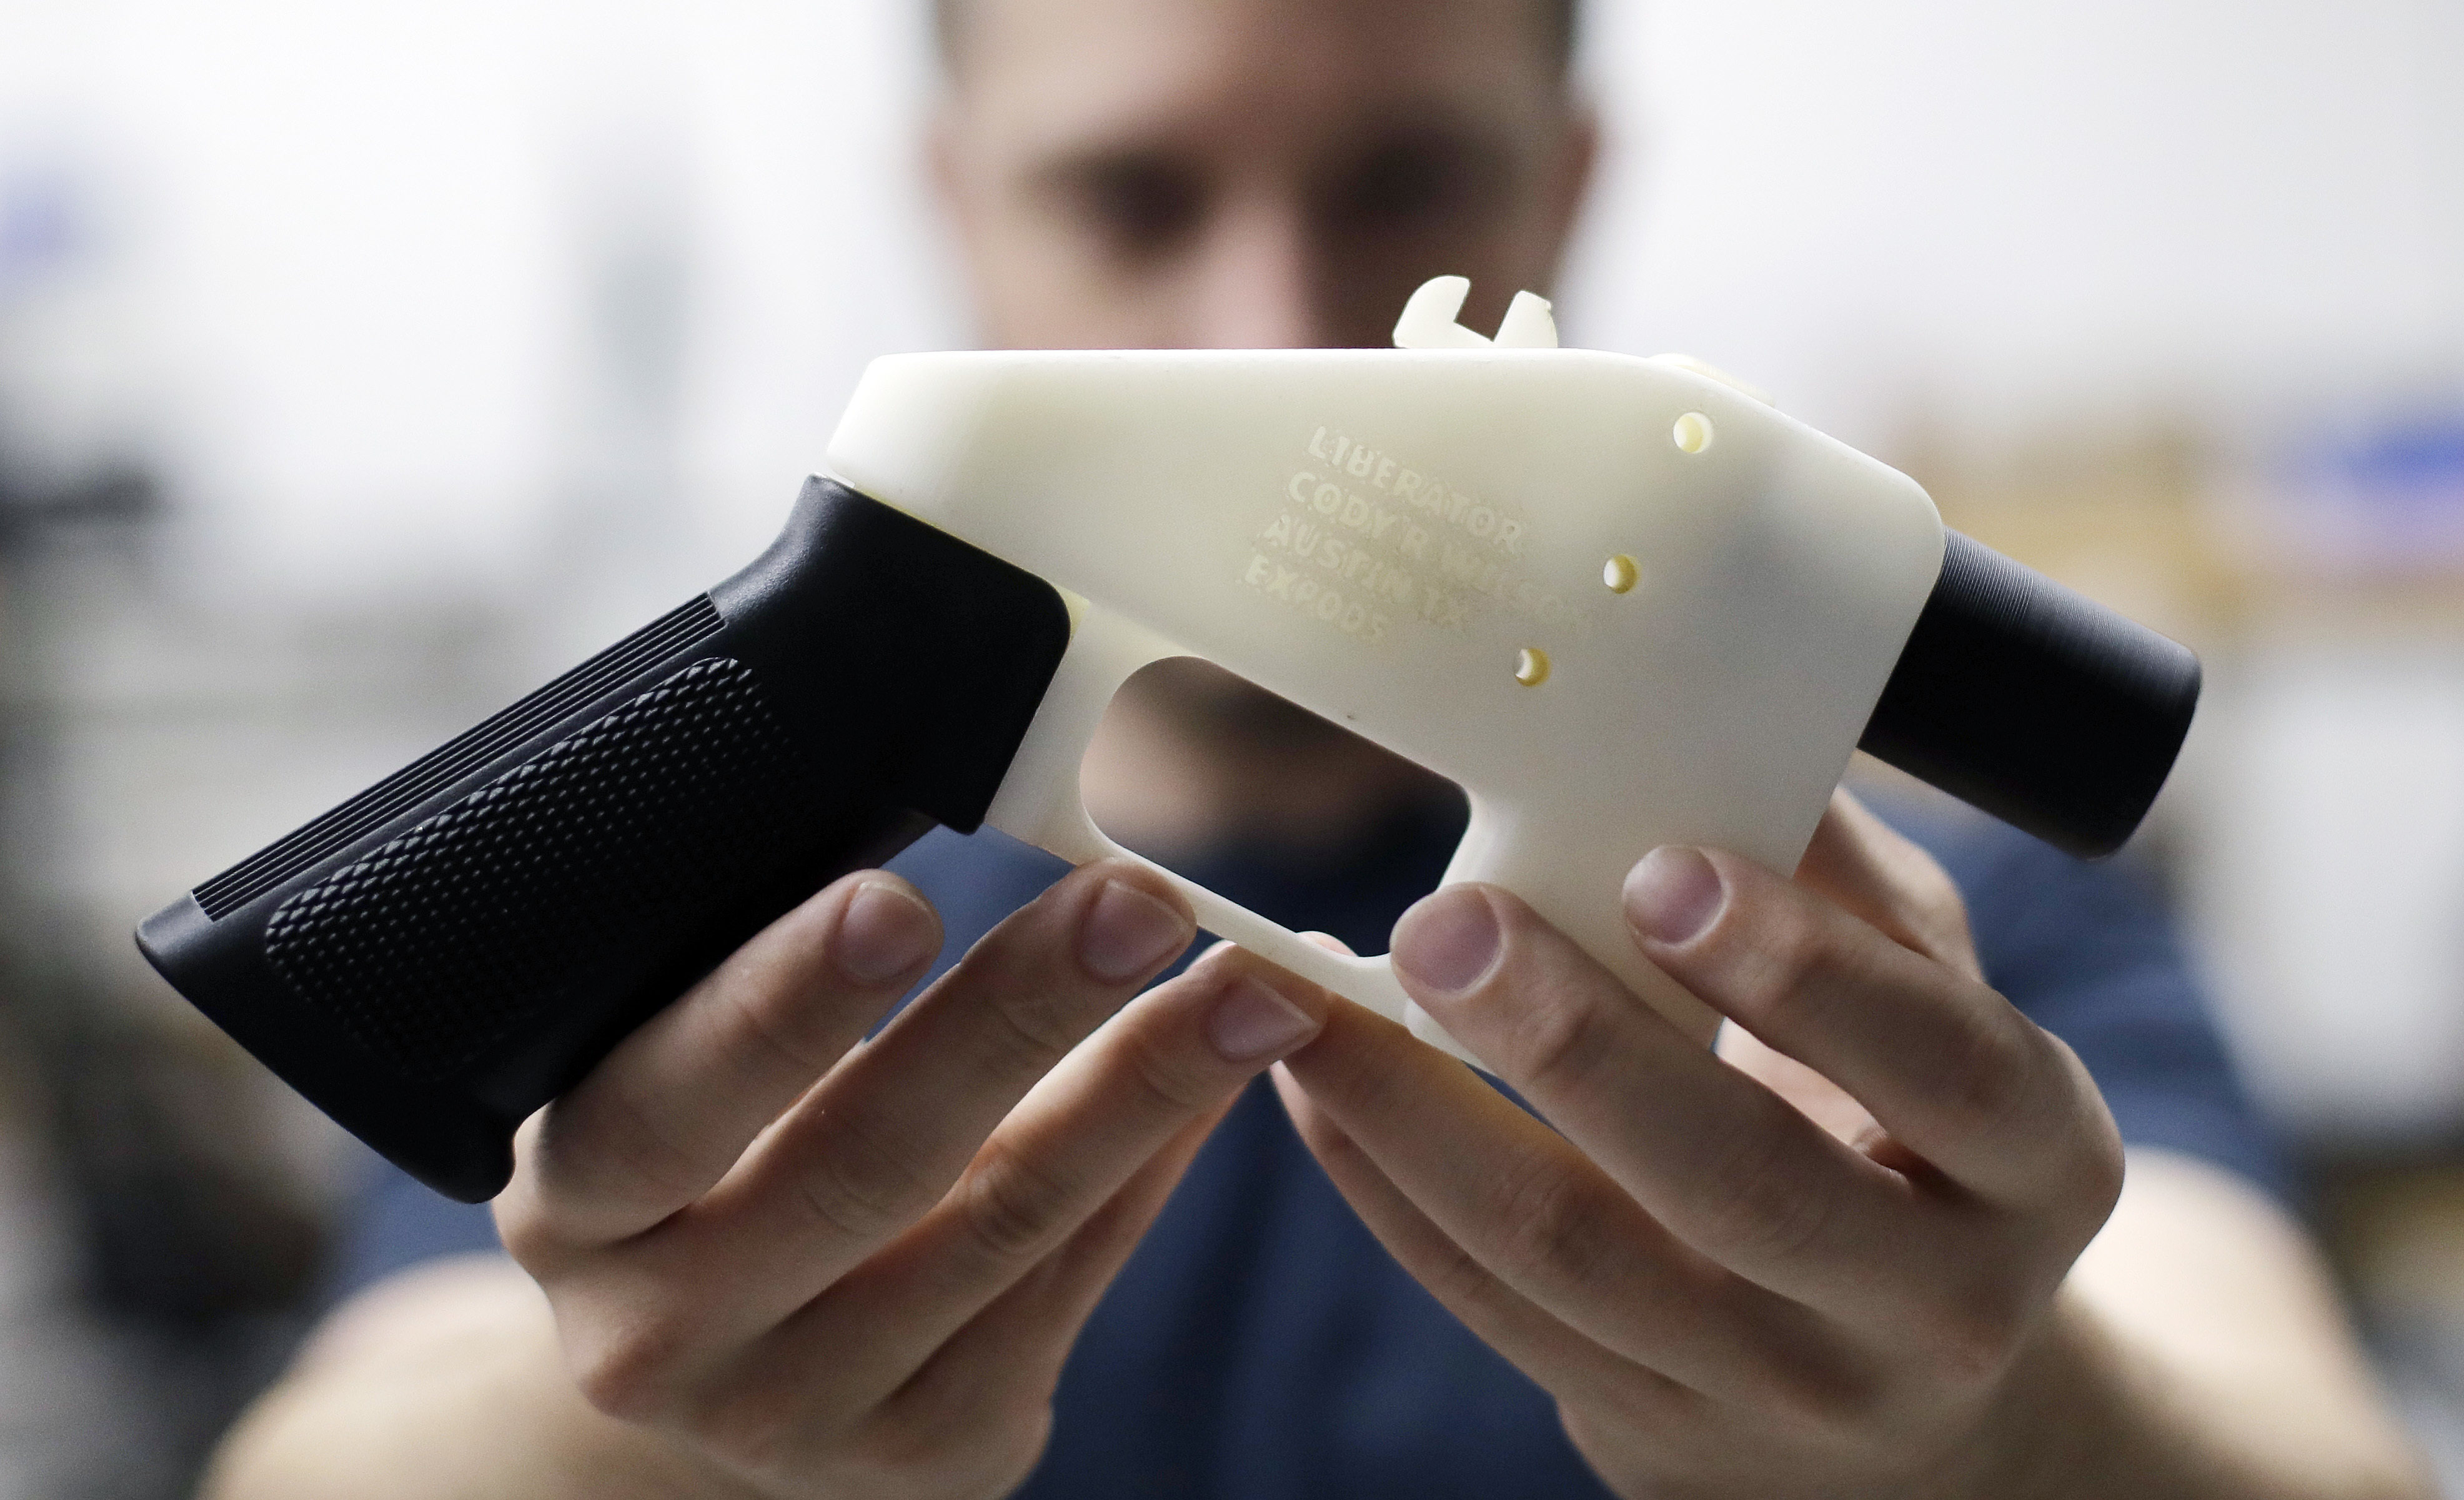 Cody Wilson holds a 3D-printed gun called the Liberator. File photo: AP